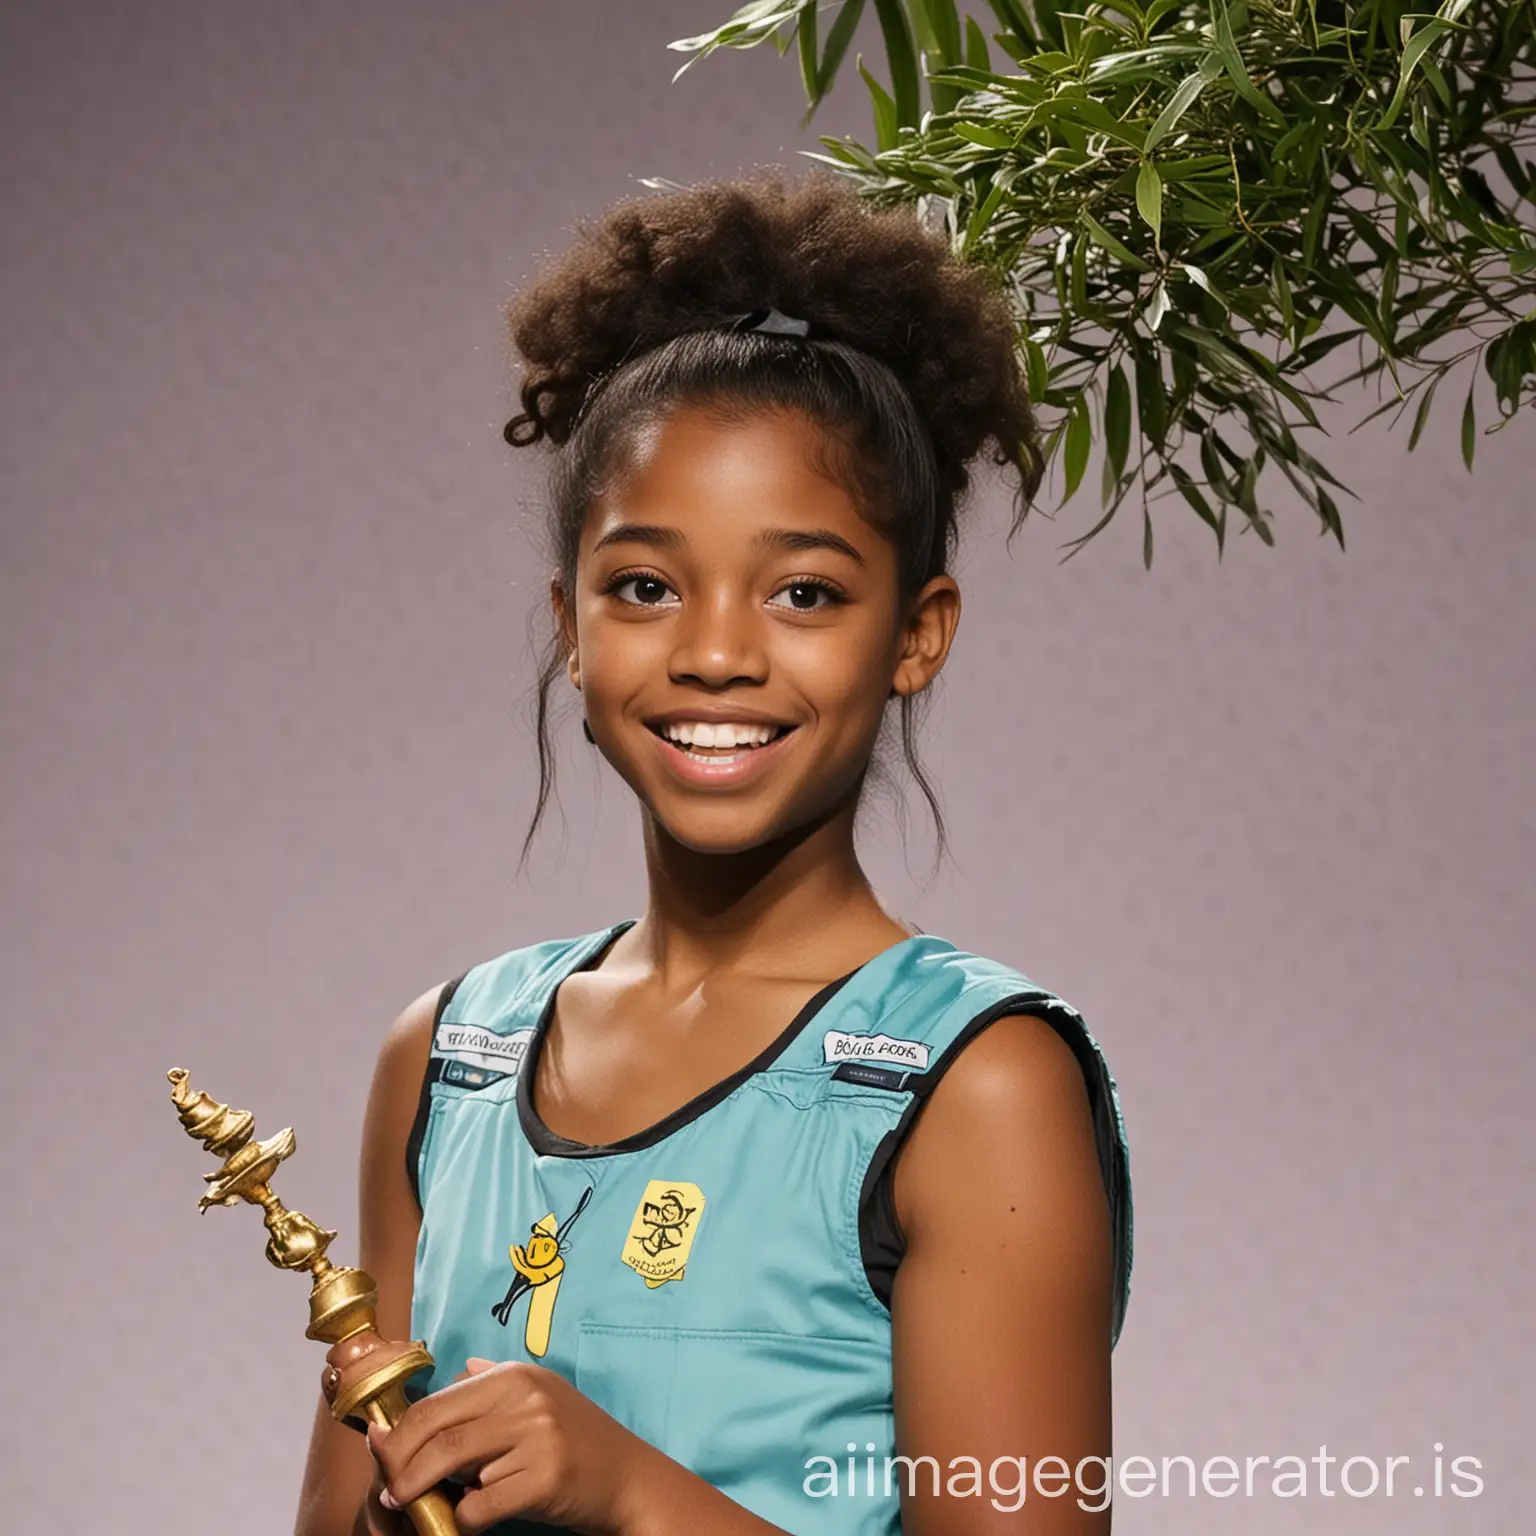 By correctly spelling murraya, a genus of tropical Asiatic and Australian trees, Zaila Avant-garde won the Scripps National Spelling Bee in Orlando on July 8. Two years after entering the world of competitive spelling, the 14-year-old from Harvey, La., made history as the first Black American to win the contest (and the $50,000 that came with it)